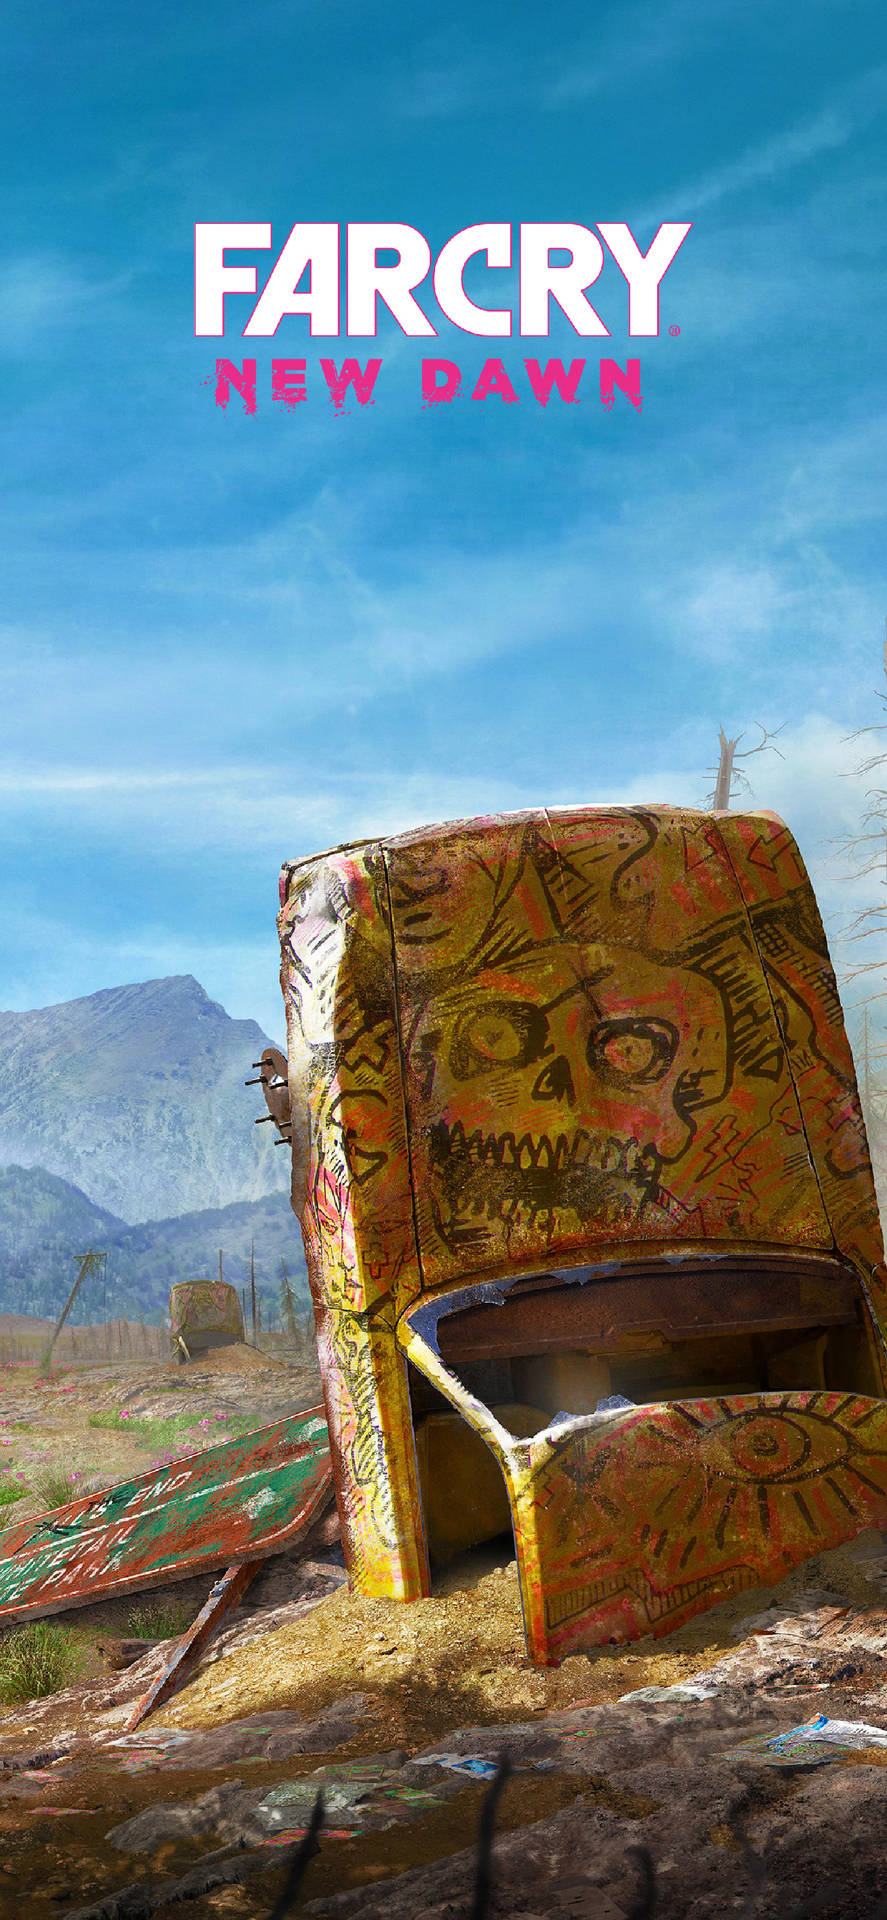 New Dawn Cover Far Cry Iphone Background